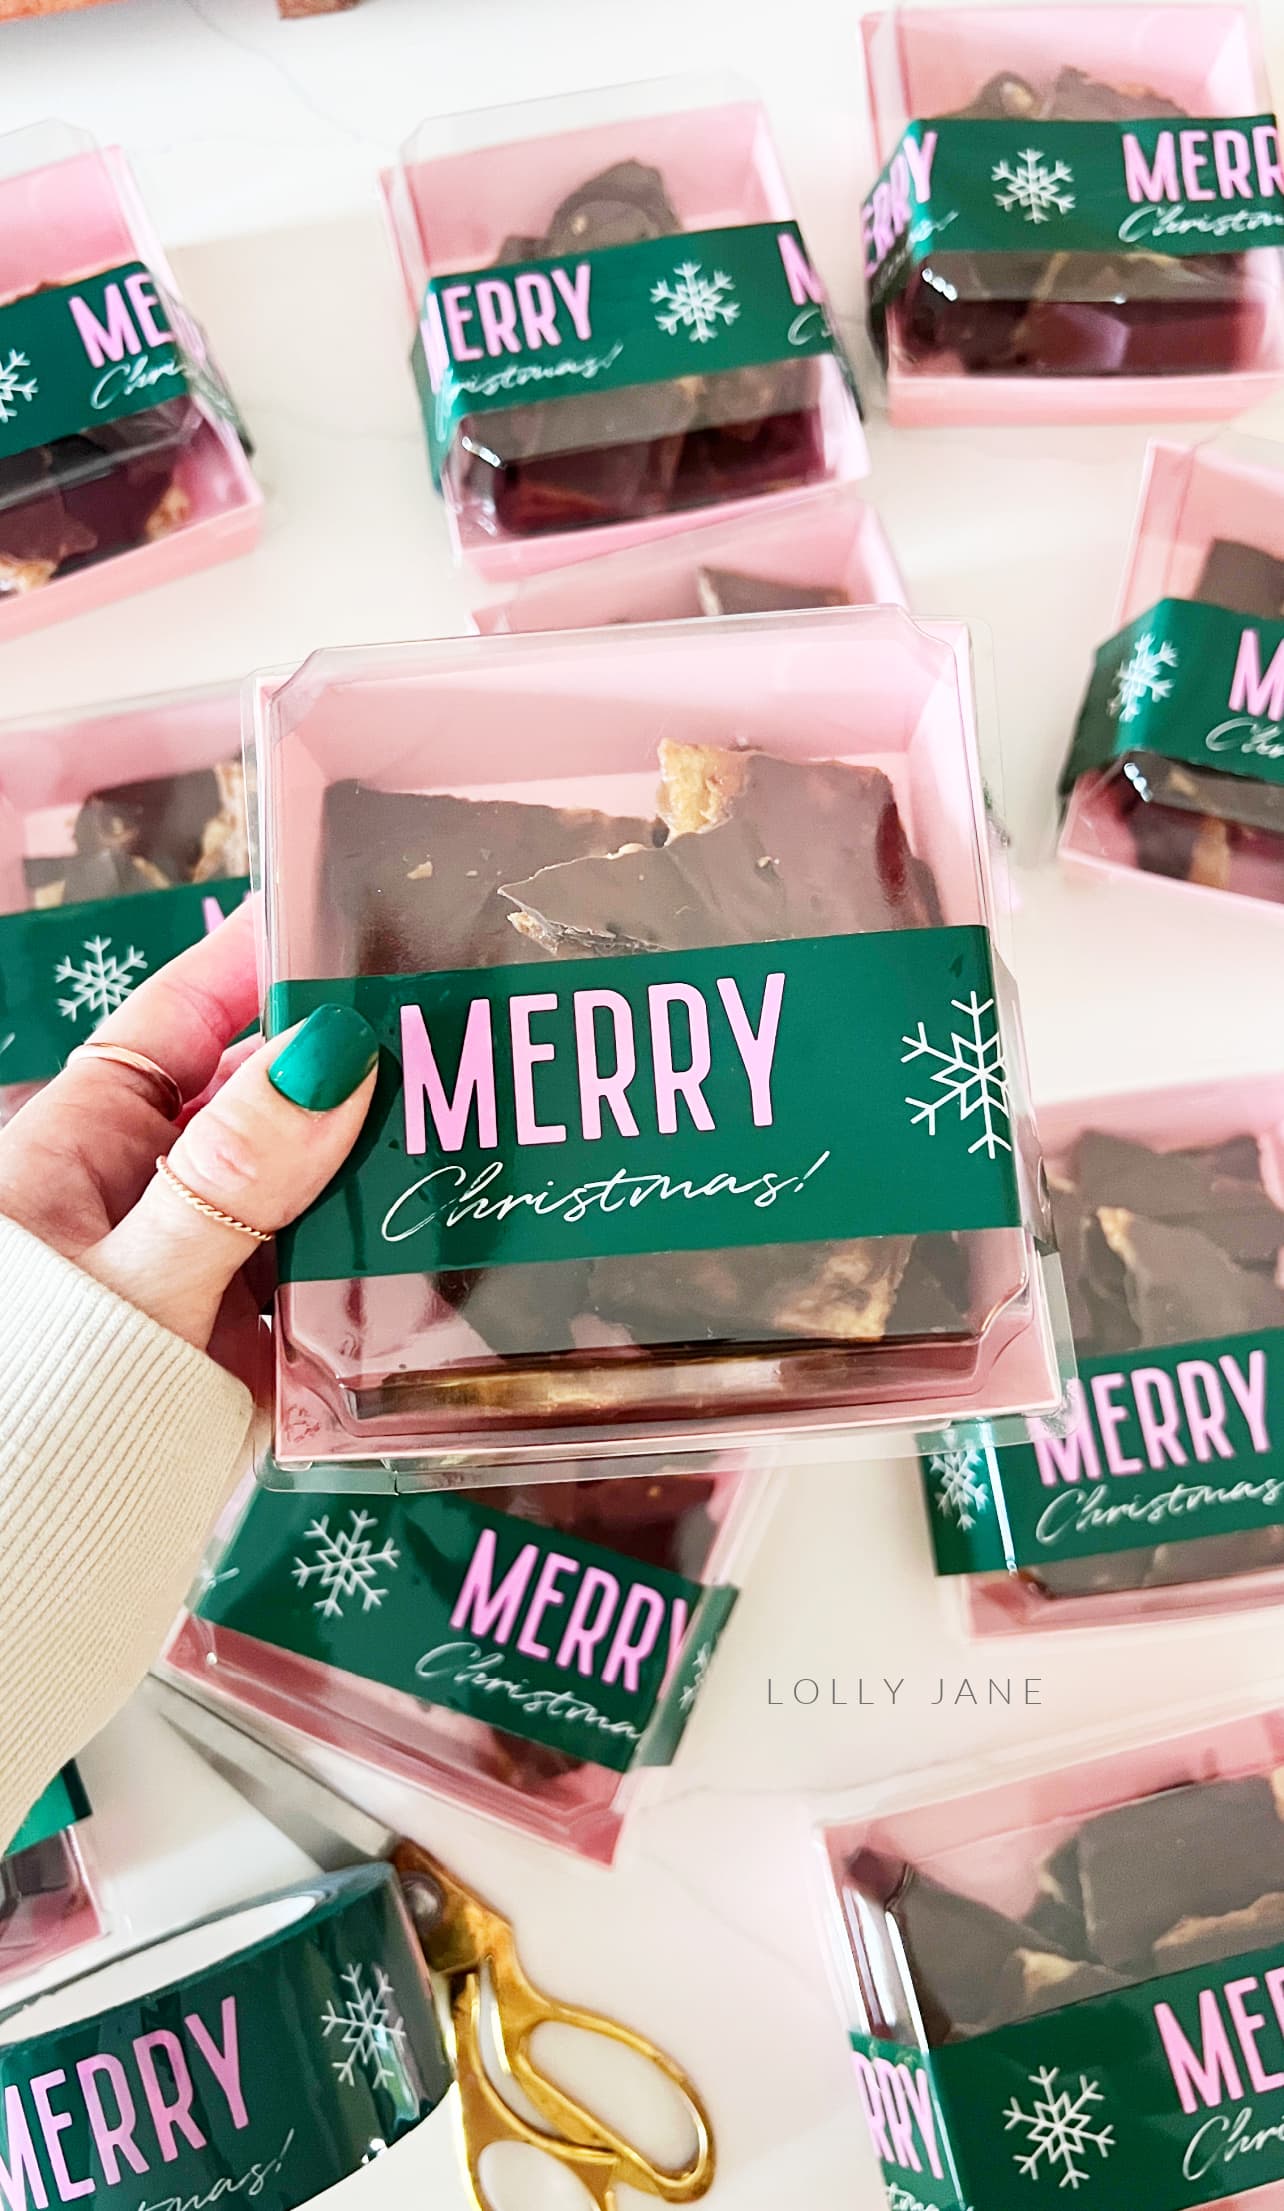 Spread holiday cheer with a thoughtful touch! 🎁✨ Our individual pink charcuterie packaging, adorned with coordinating Merry Christmas tape, is the perfect neighbor gift idea. Create a festive presentation for a delicious surprise that's sure to delight. 🍇🧀 Packaged with love, this charming ensemble makes sharing the joy of the season easy and stylish. #NeighborGifts #HolidayCheer #CharcuterieLove #MerryChristmas